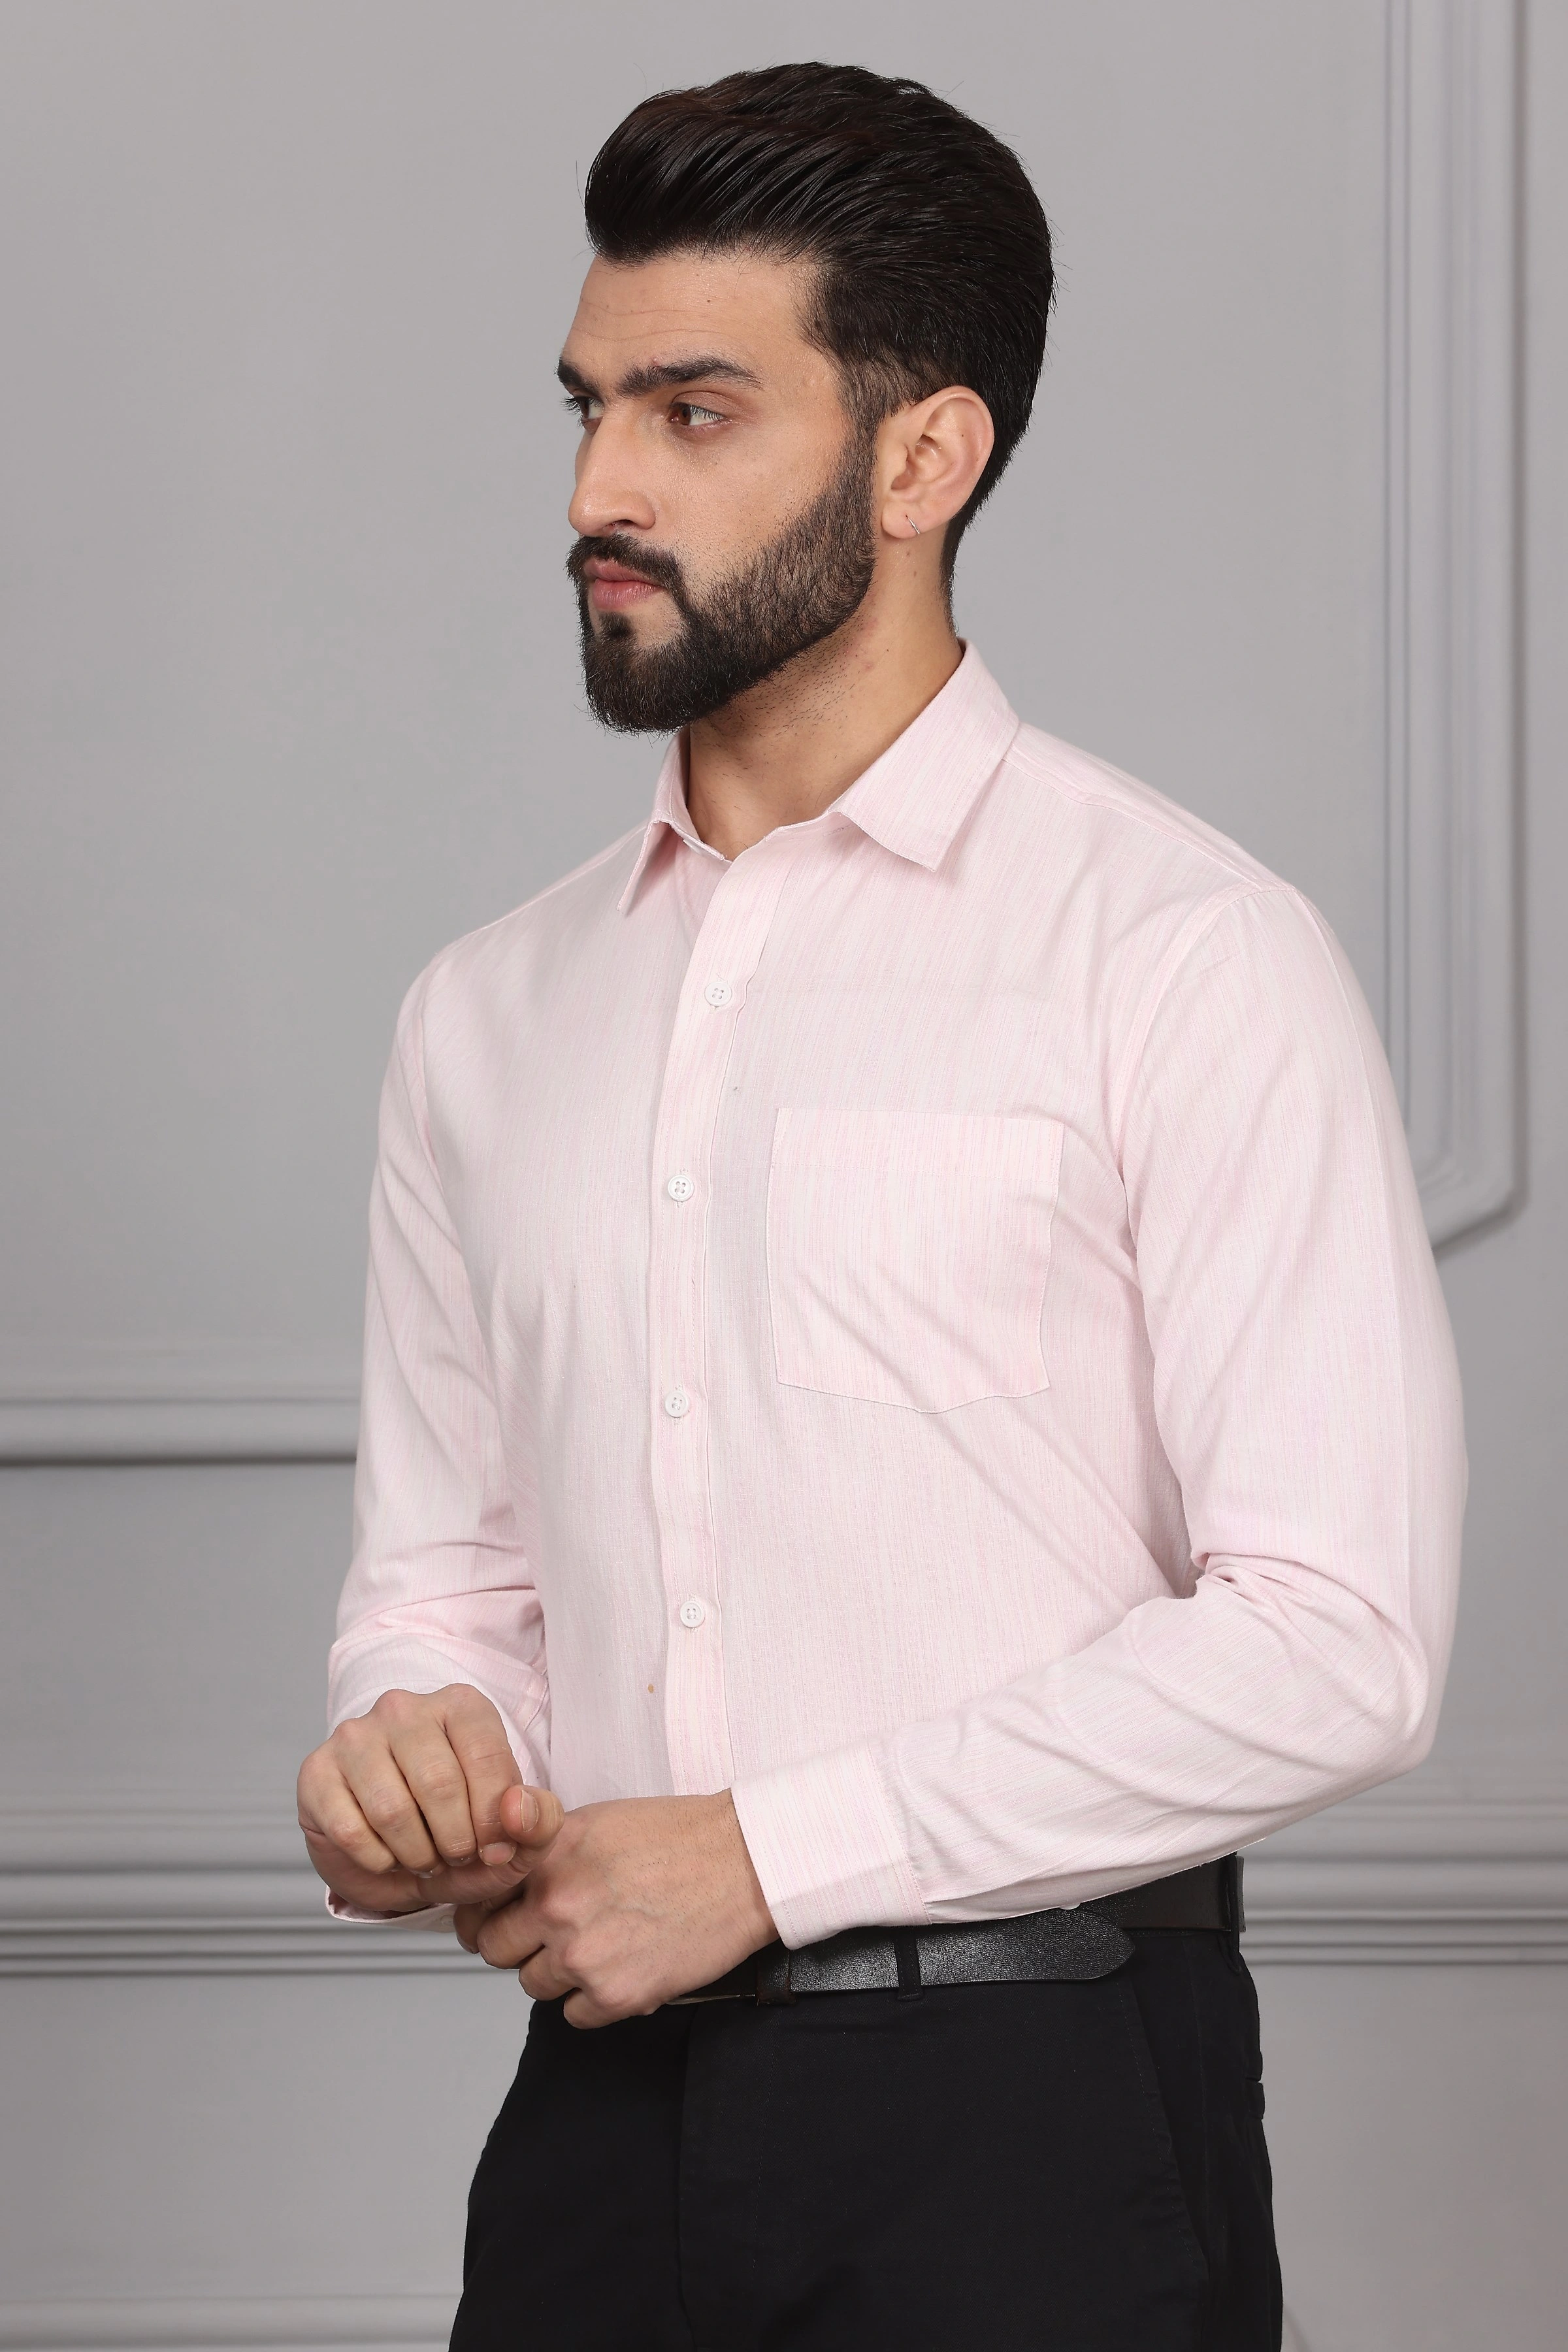 Textured Pink White Business Formal Cotton Shirt-S-1